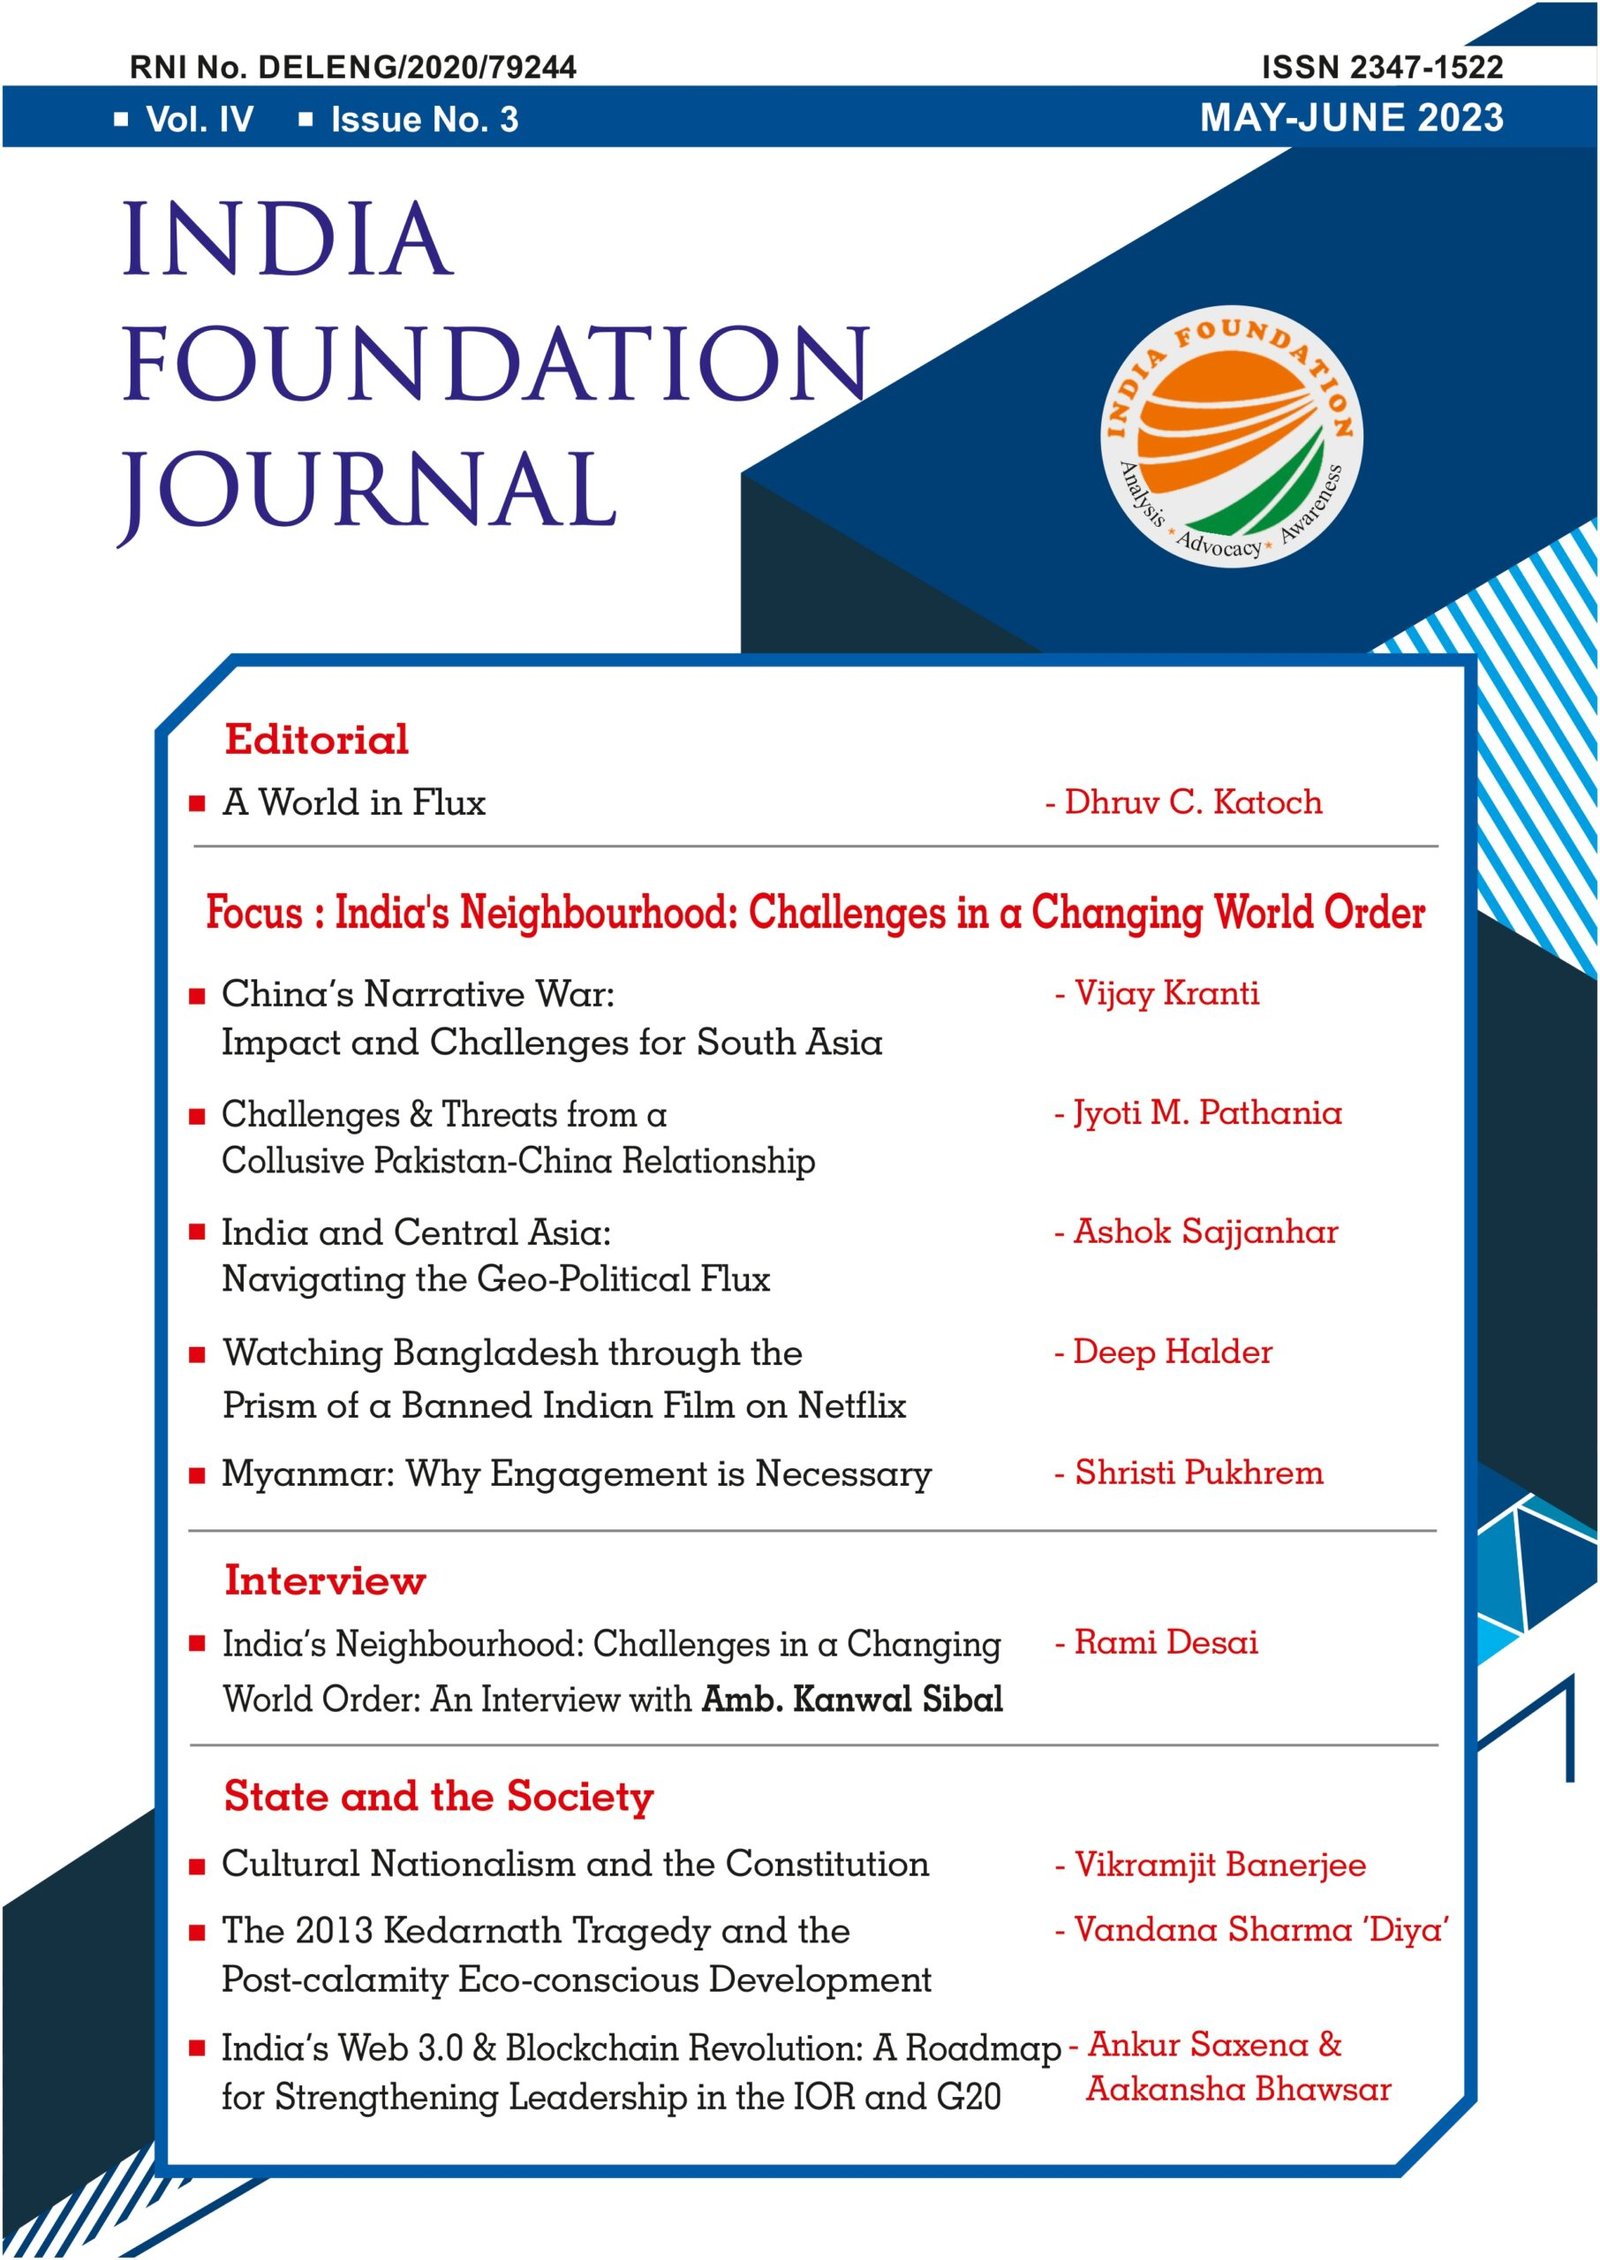 India Foundation Journal: May-June 2023